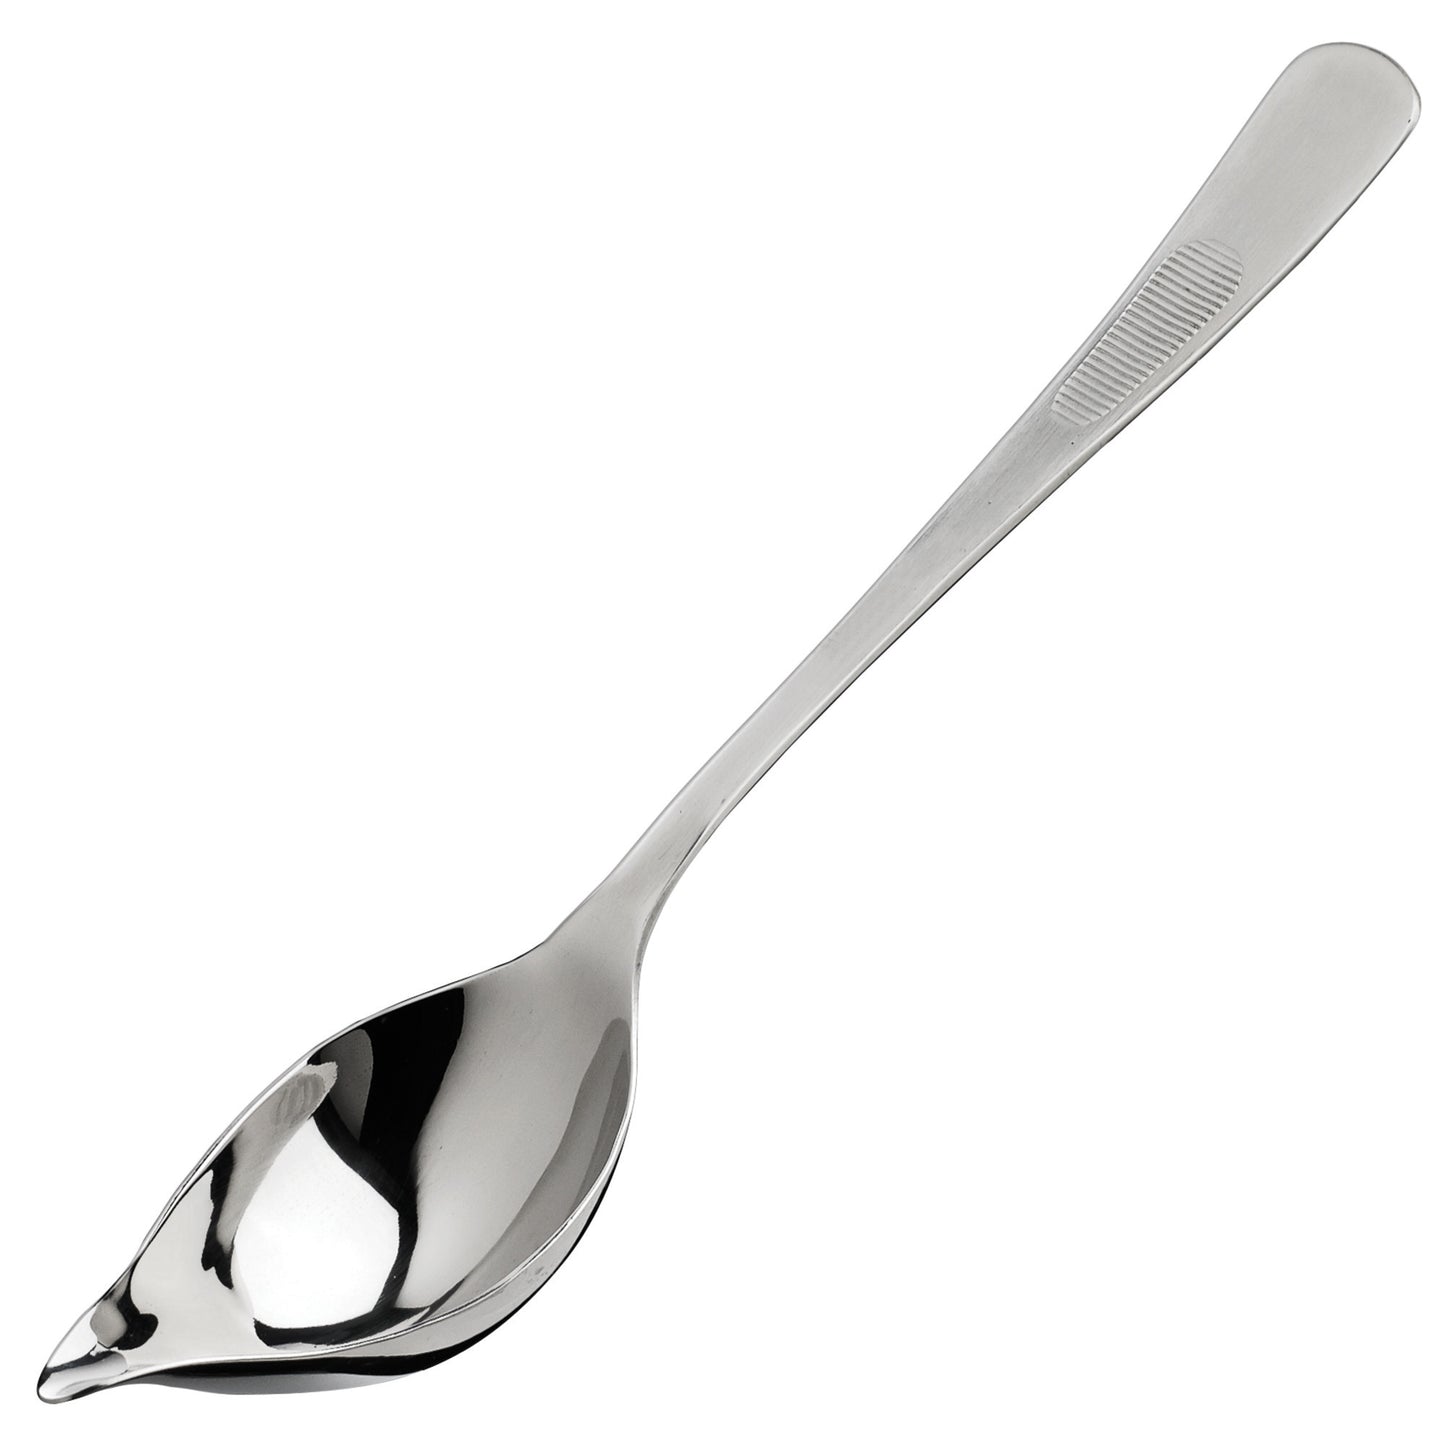 SPS-TS8 - 8" Drizzling Plating Spoon with Tapered Spout